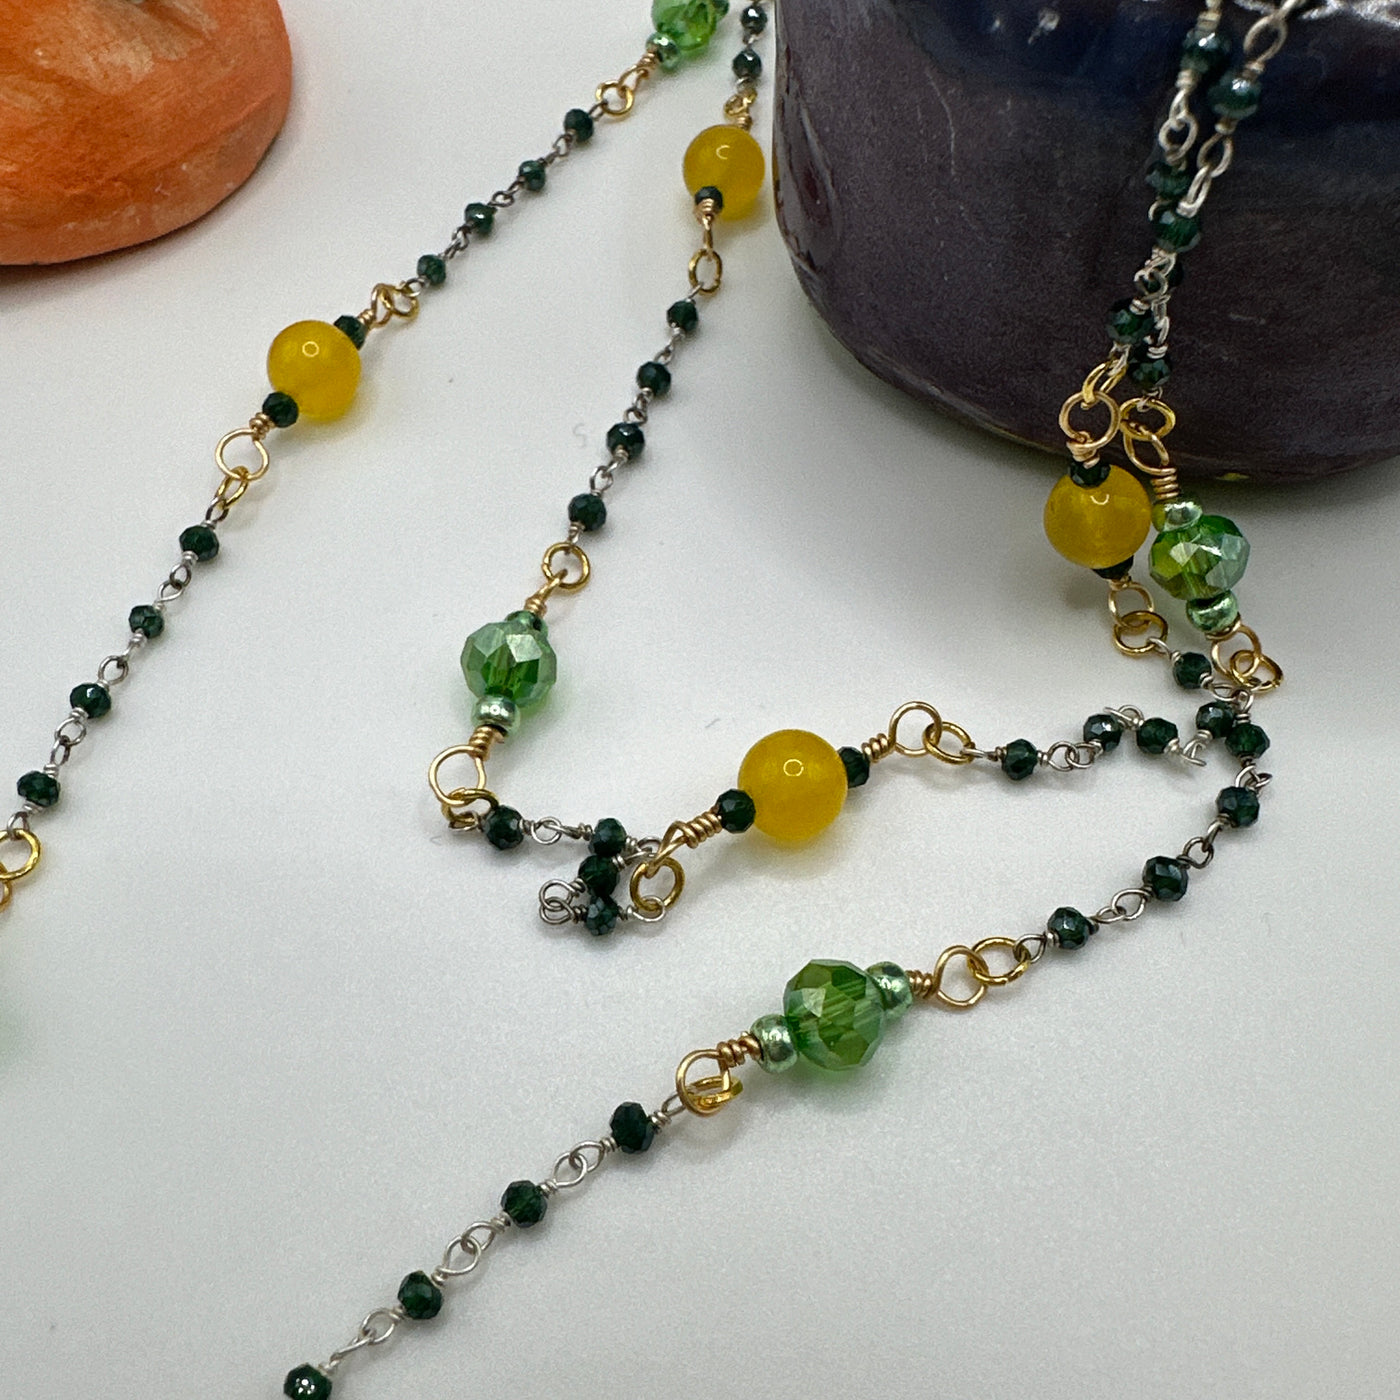 Scarf necklace silver 925 and dark green beads with citrine and green faceted beads